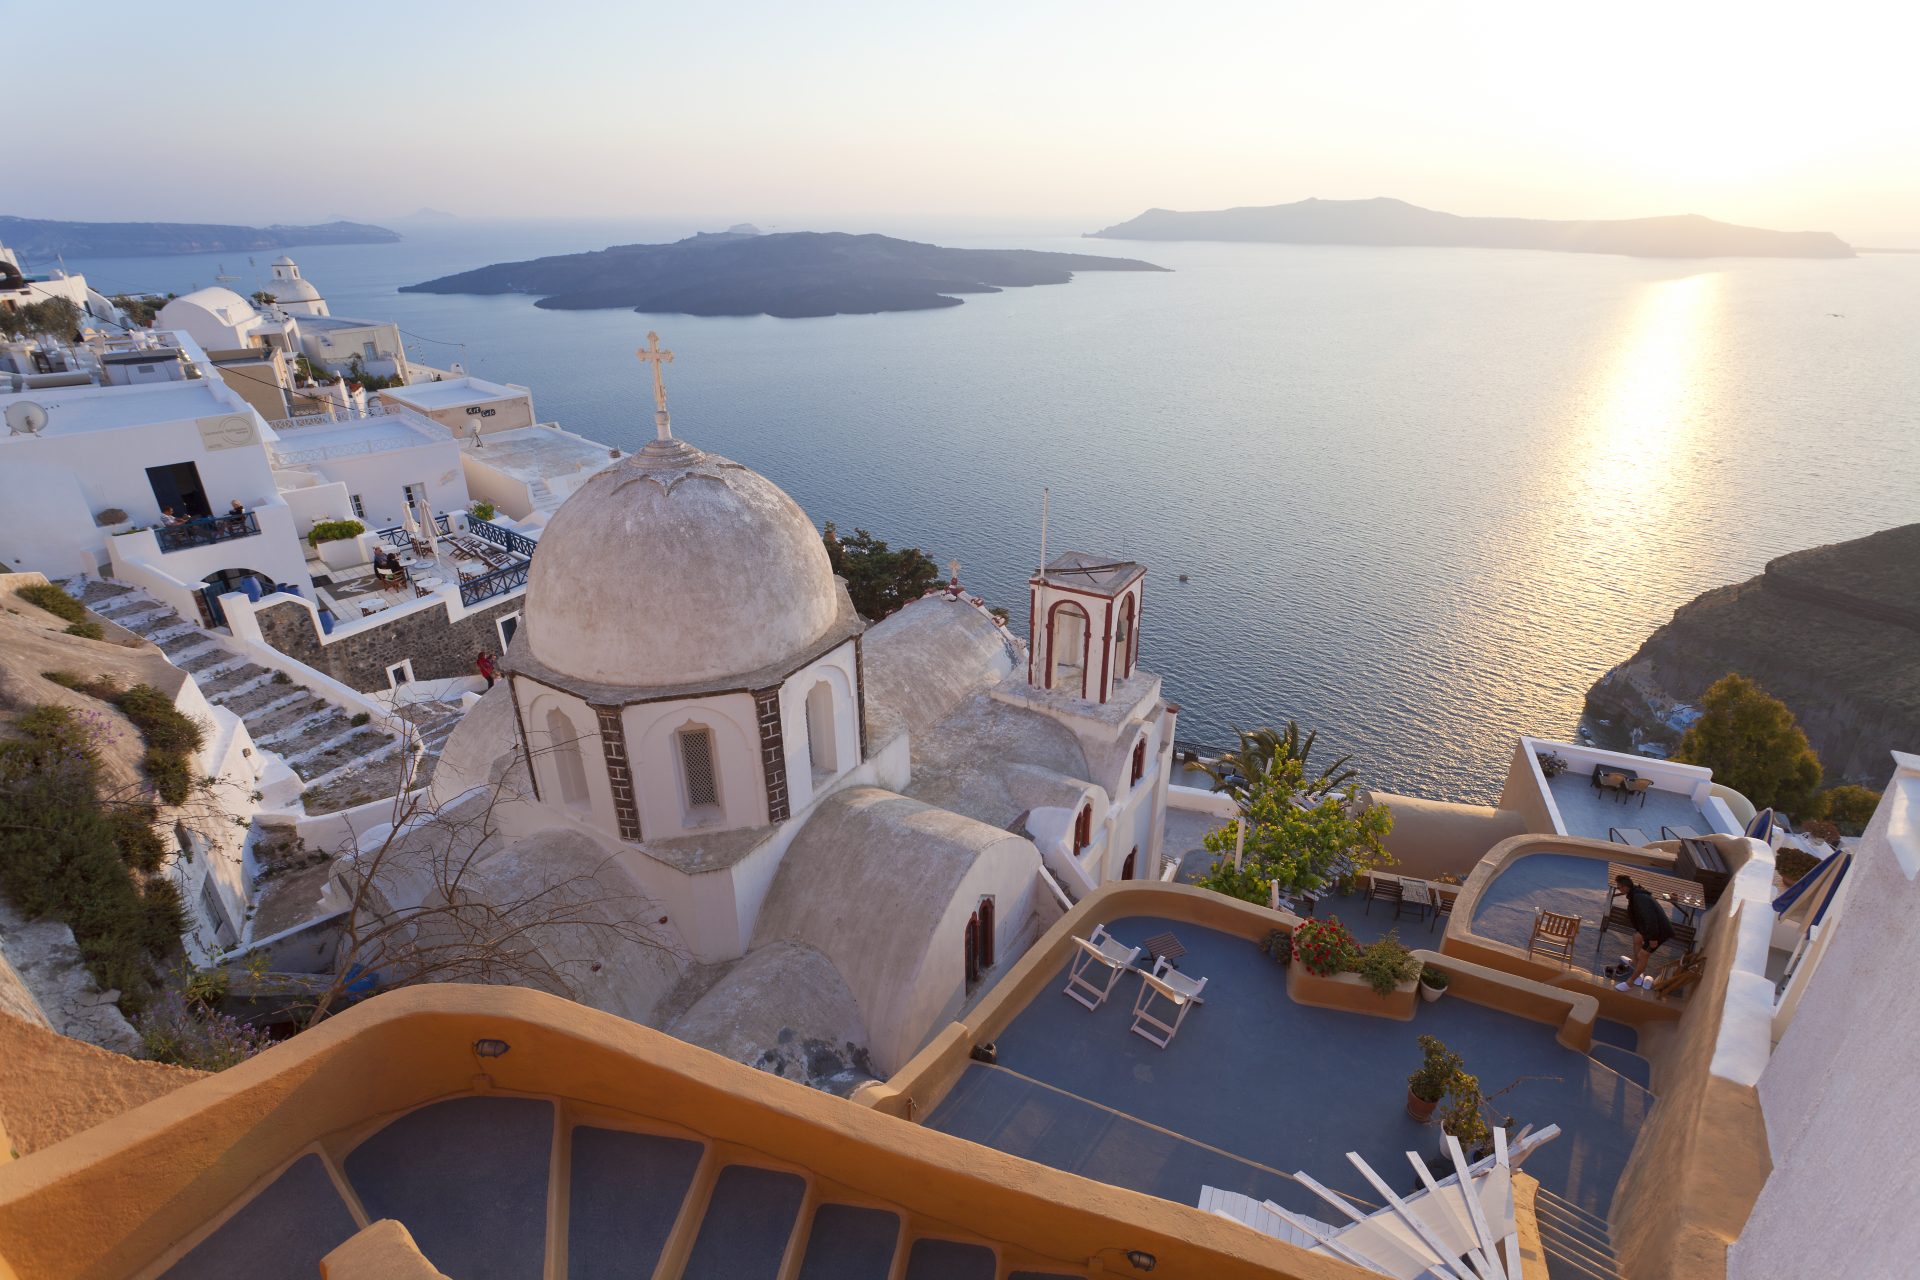 Why tourists in Greece keep disappearing